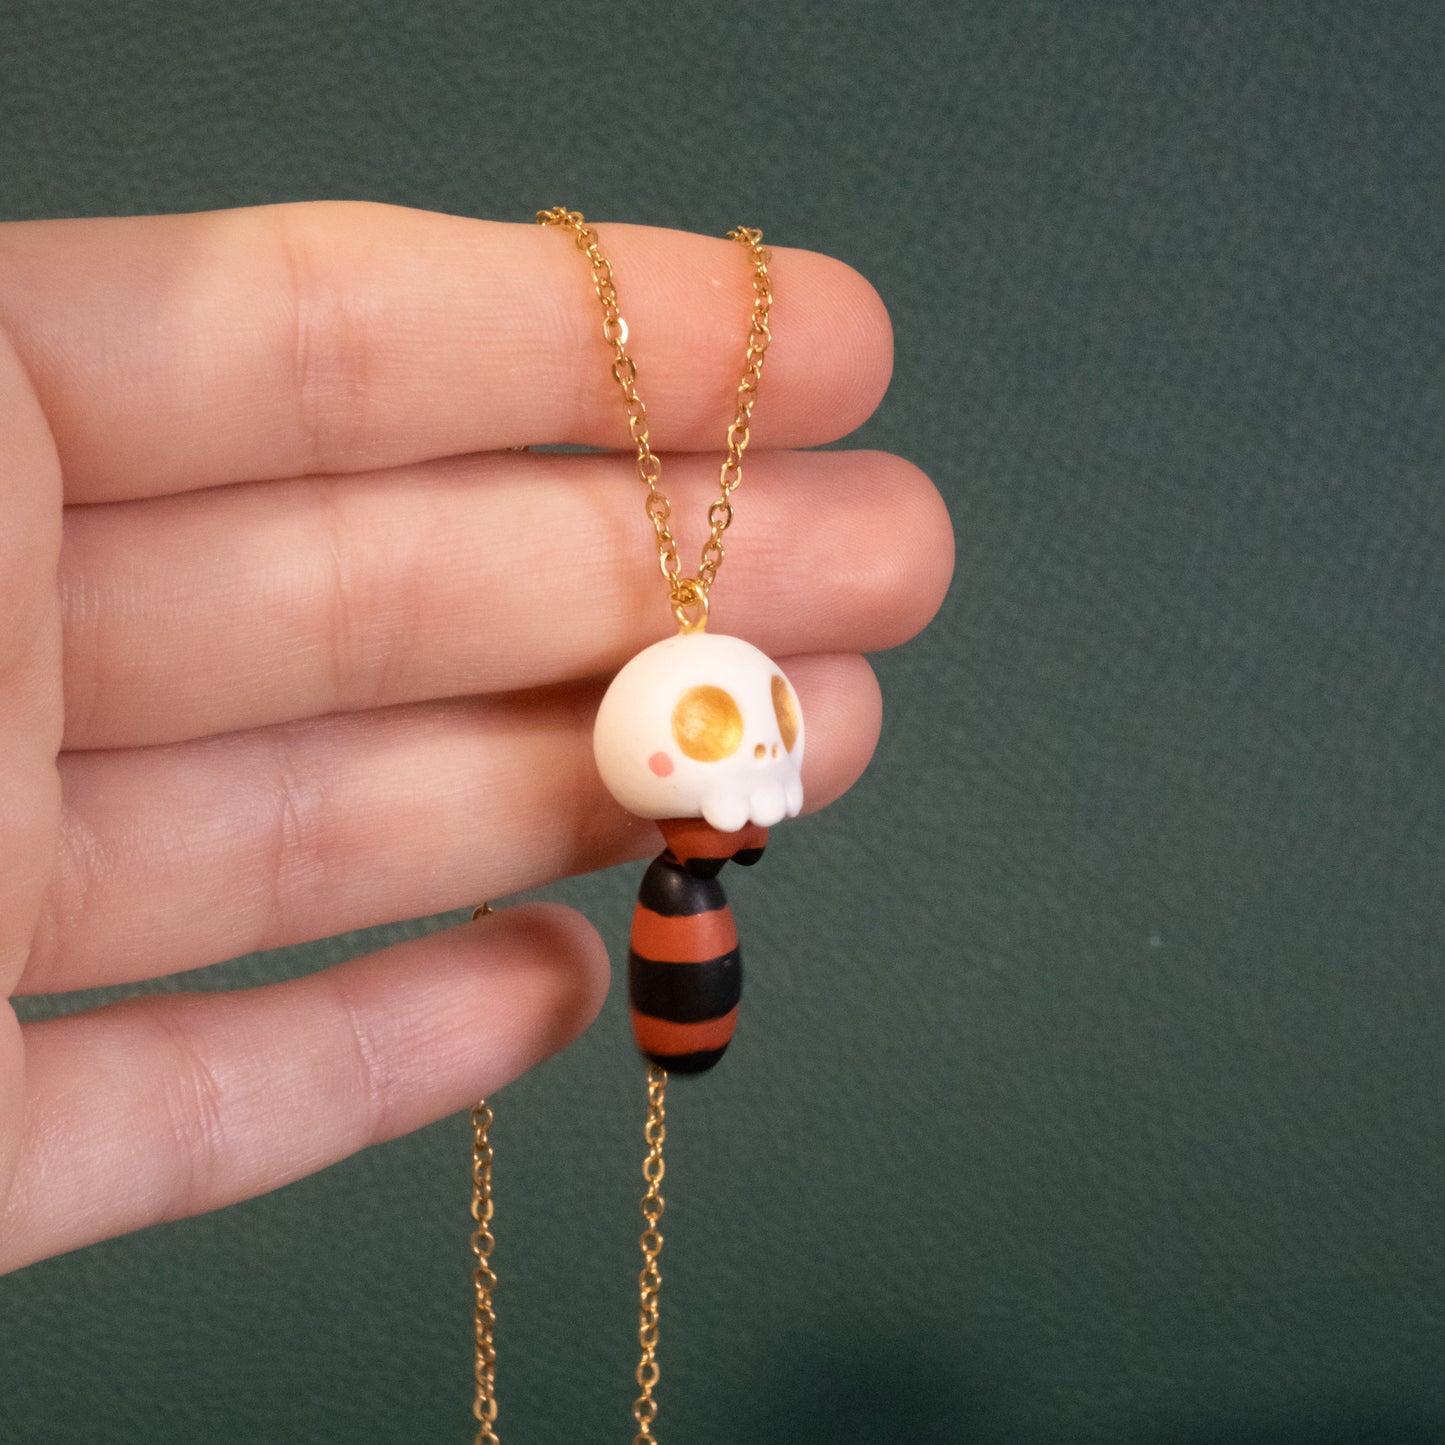 Red Panda Necklace in Polymer Clay